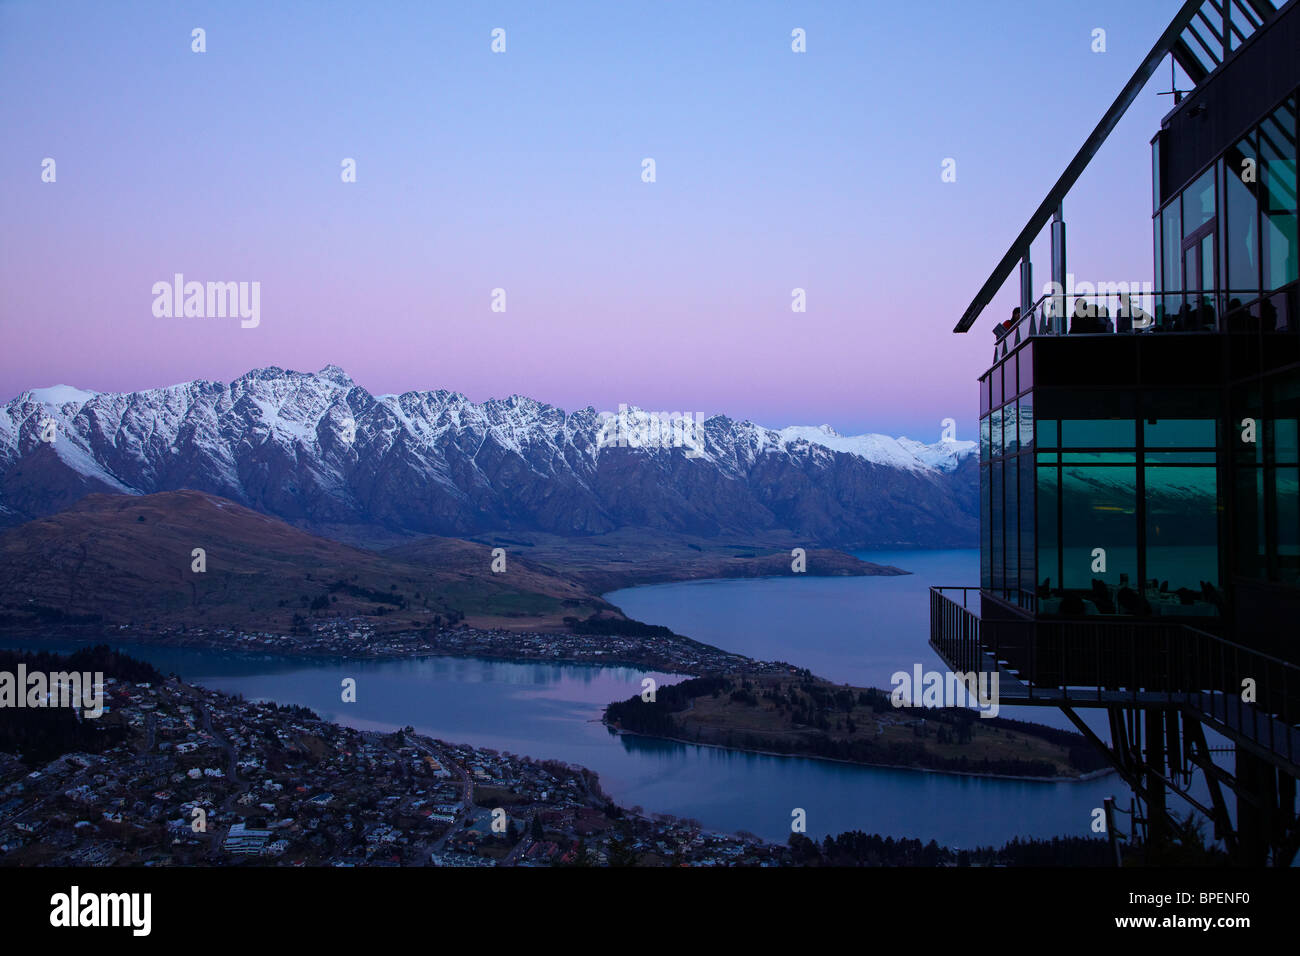 Dusk over Skyline Restaurant, The Remarkables and Lake Wakatipu, Queenstown, South Island, New Zealand Stock Photo